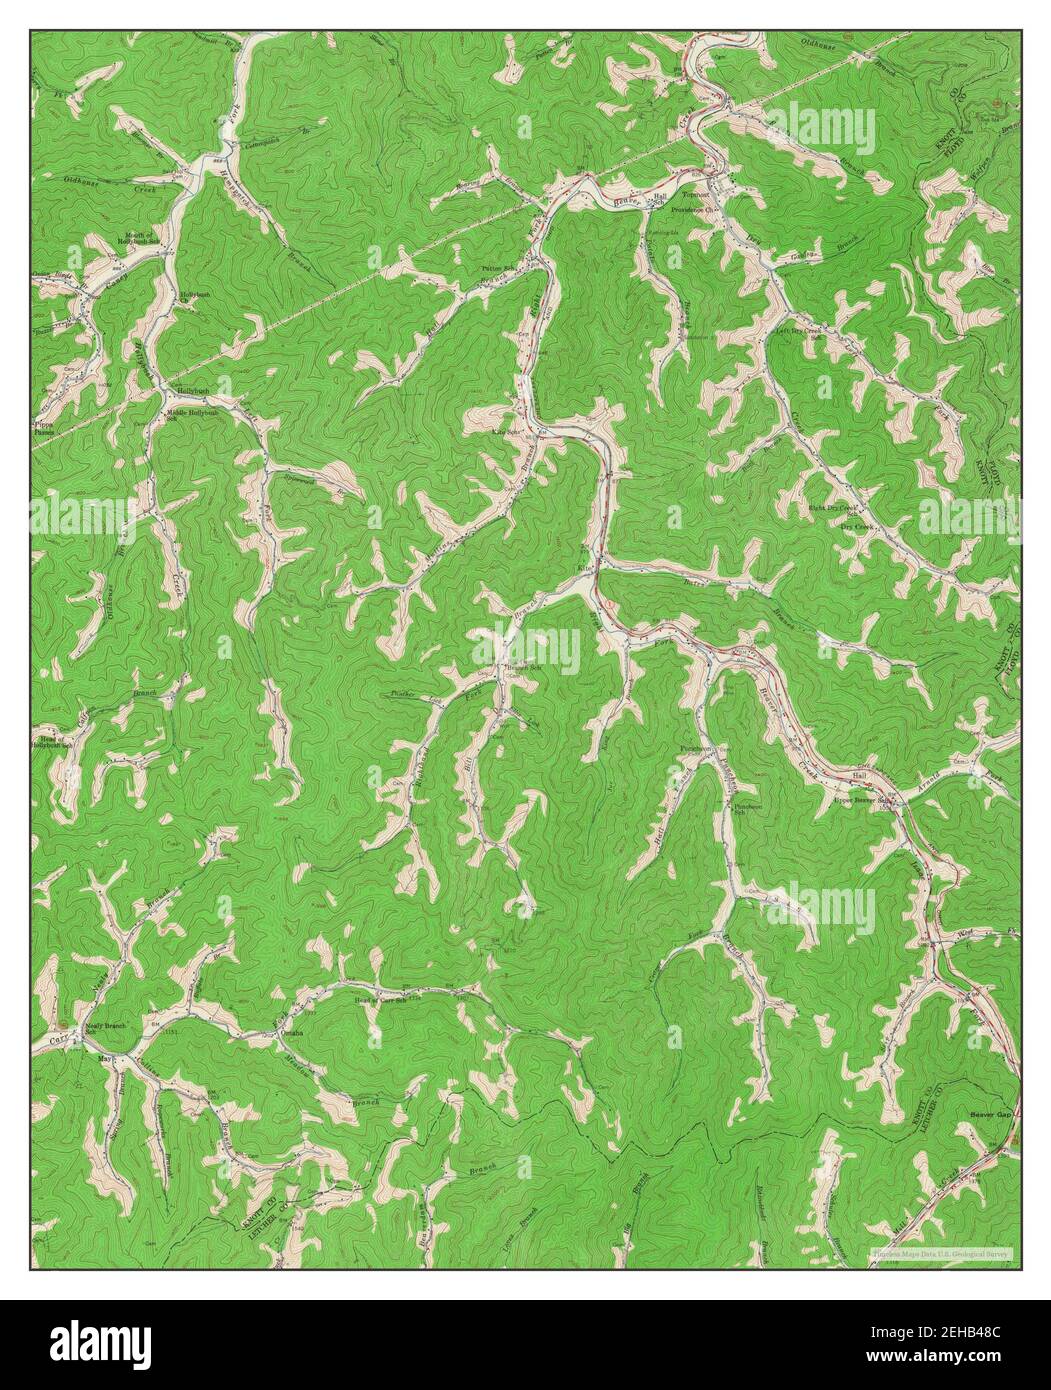 Kite, Kentucky, map 1954, 1:24000, United States of America by Timeless Maps, data U.S. Geological Survey Stock Photo